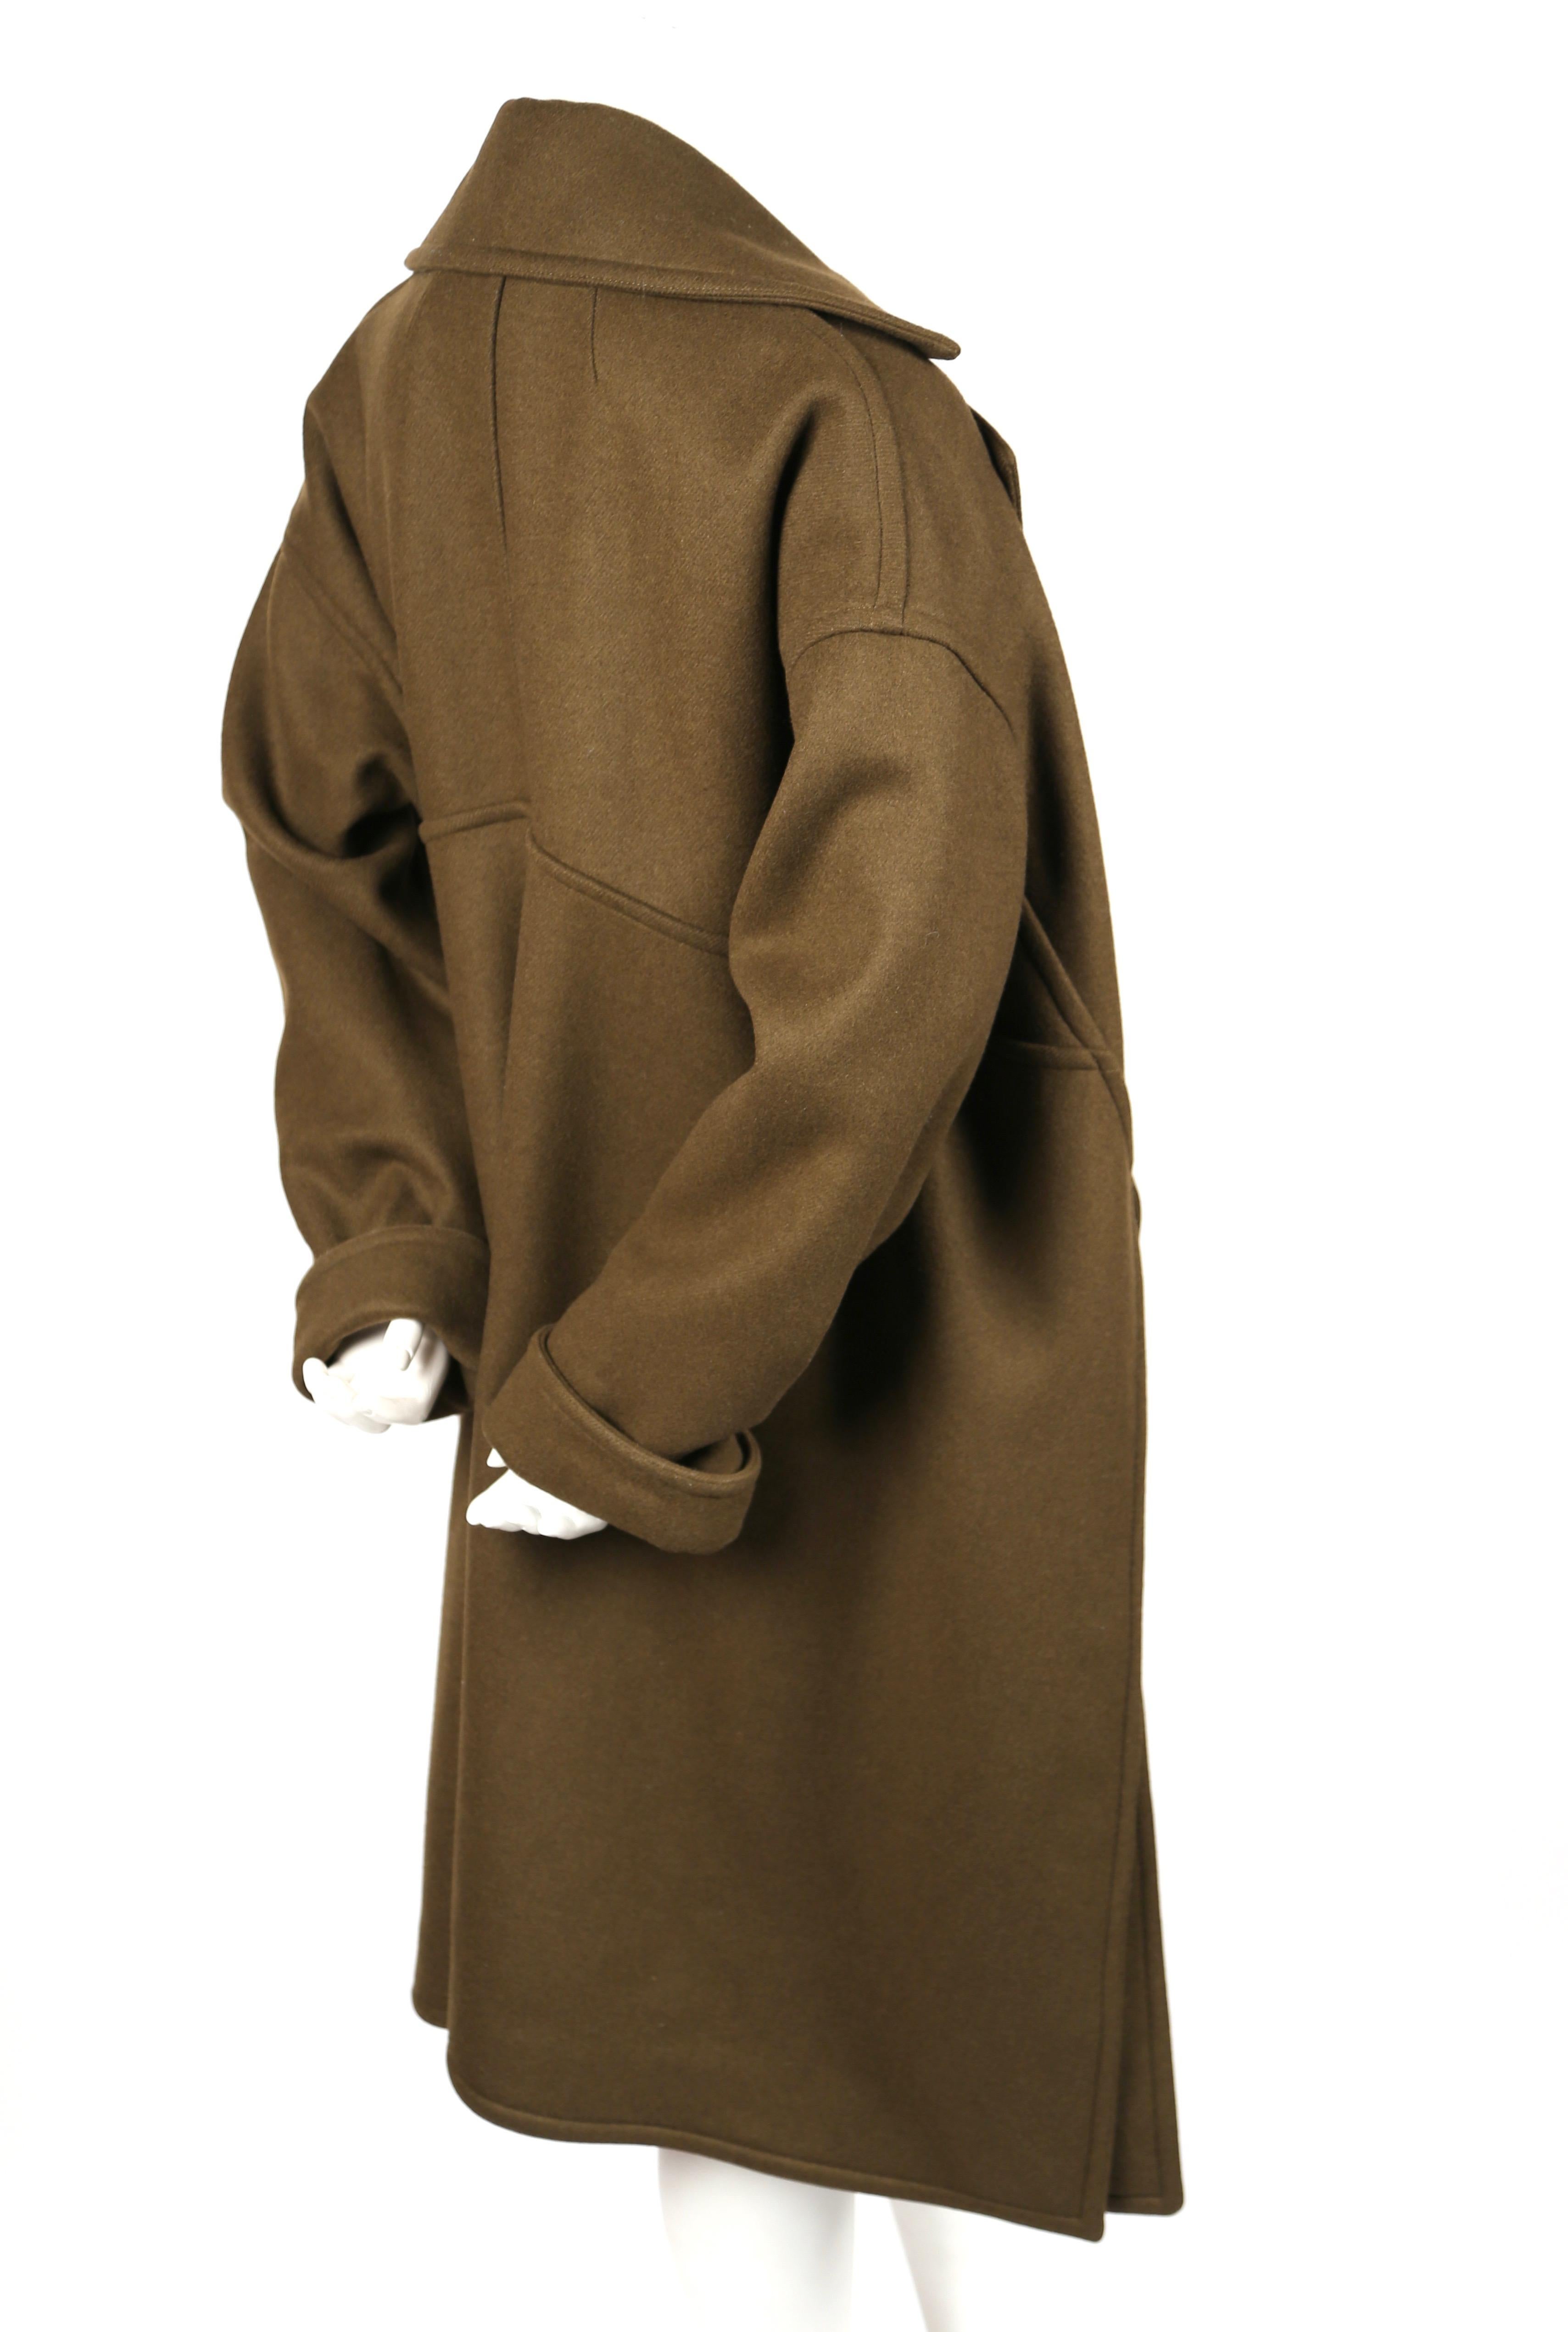 Stunning, khaki wool coat with open closure designed by Phoebe Philo for Celine dating to pre-fall of 2015, look 5. Labeled a French 36 however due to oversized cut, it will accommodate many sizes. Approximate measurements: bust 44